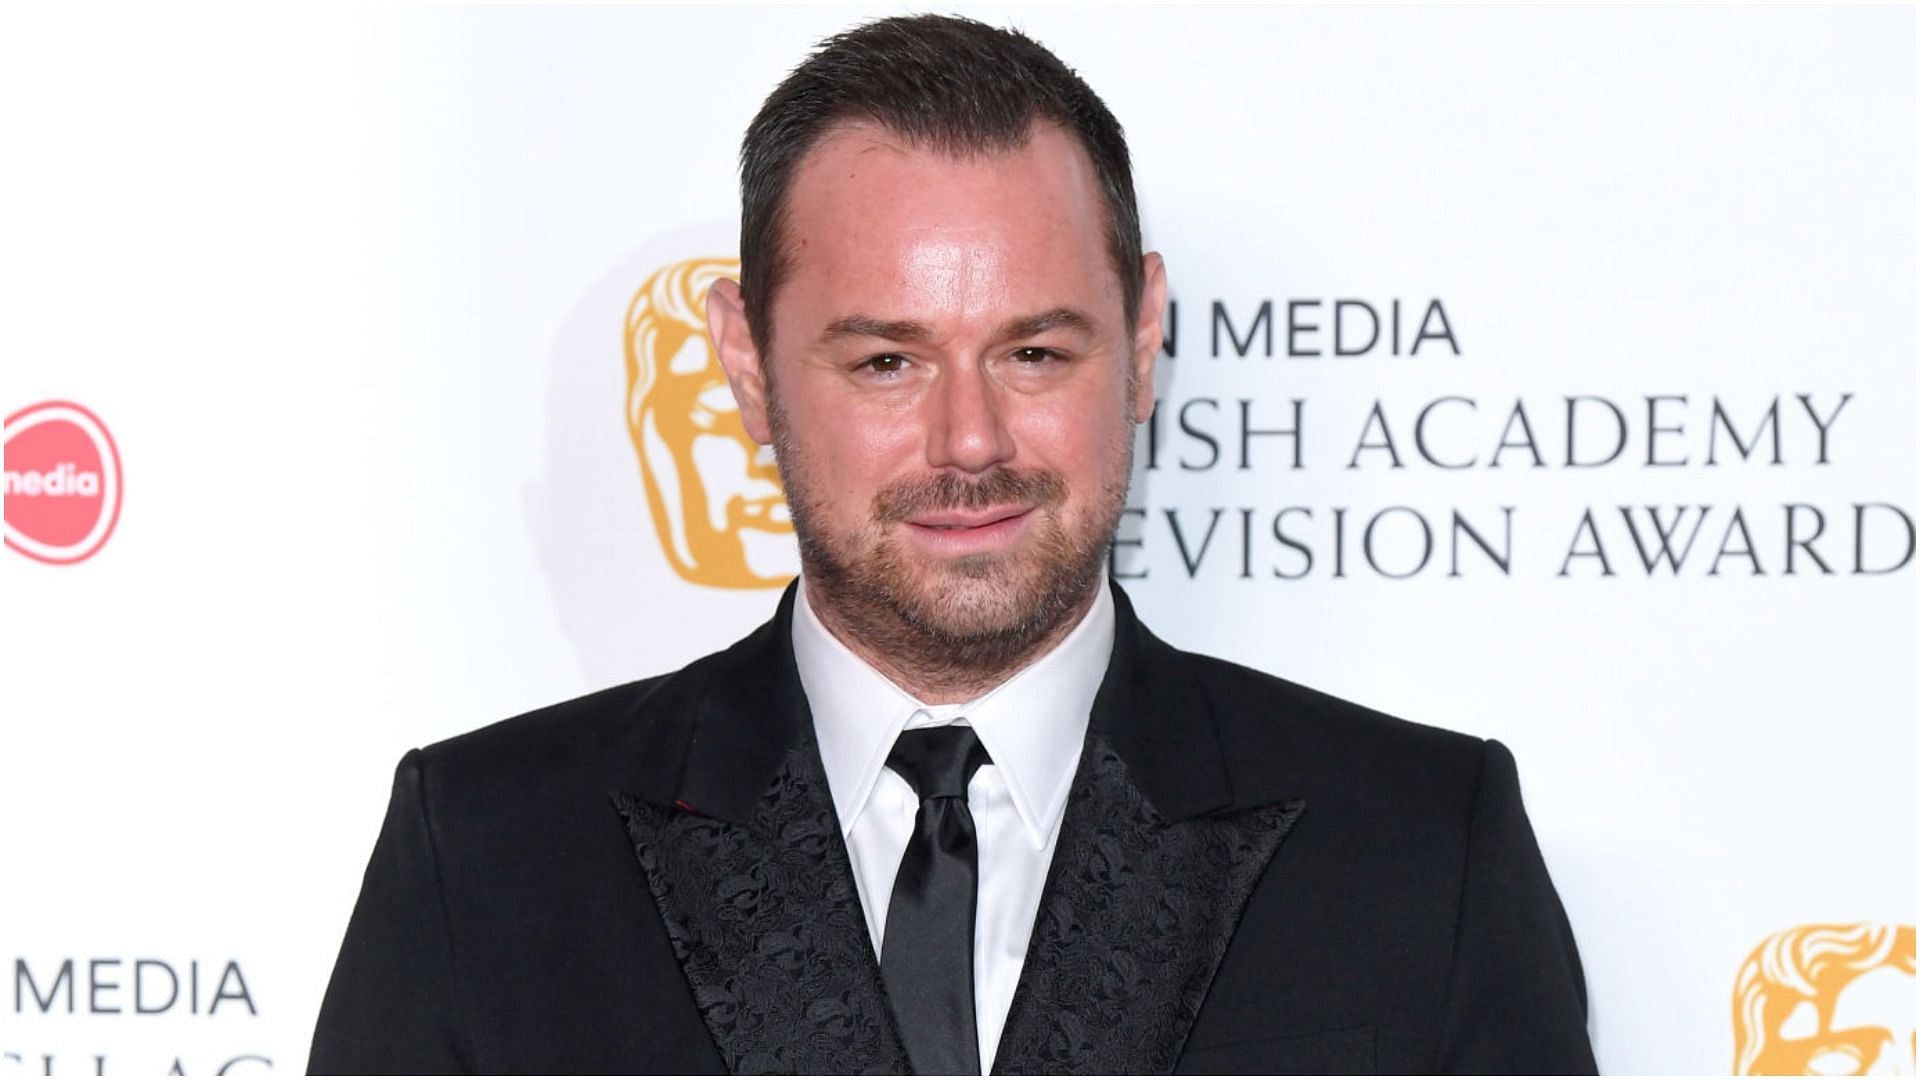 Danny Dyer has announced his exit from EastEnders (Image via Karwai Tang/Getty Images)